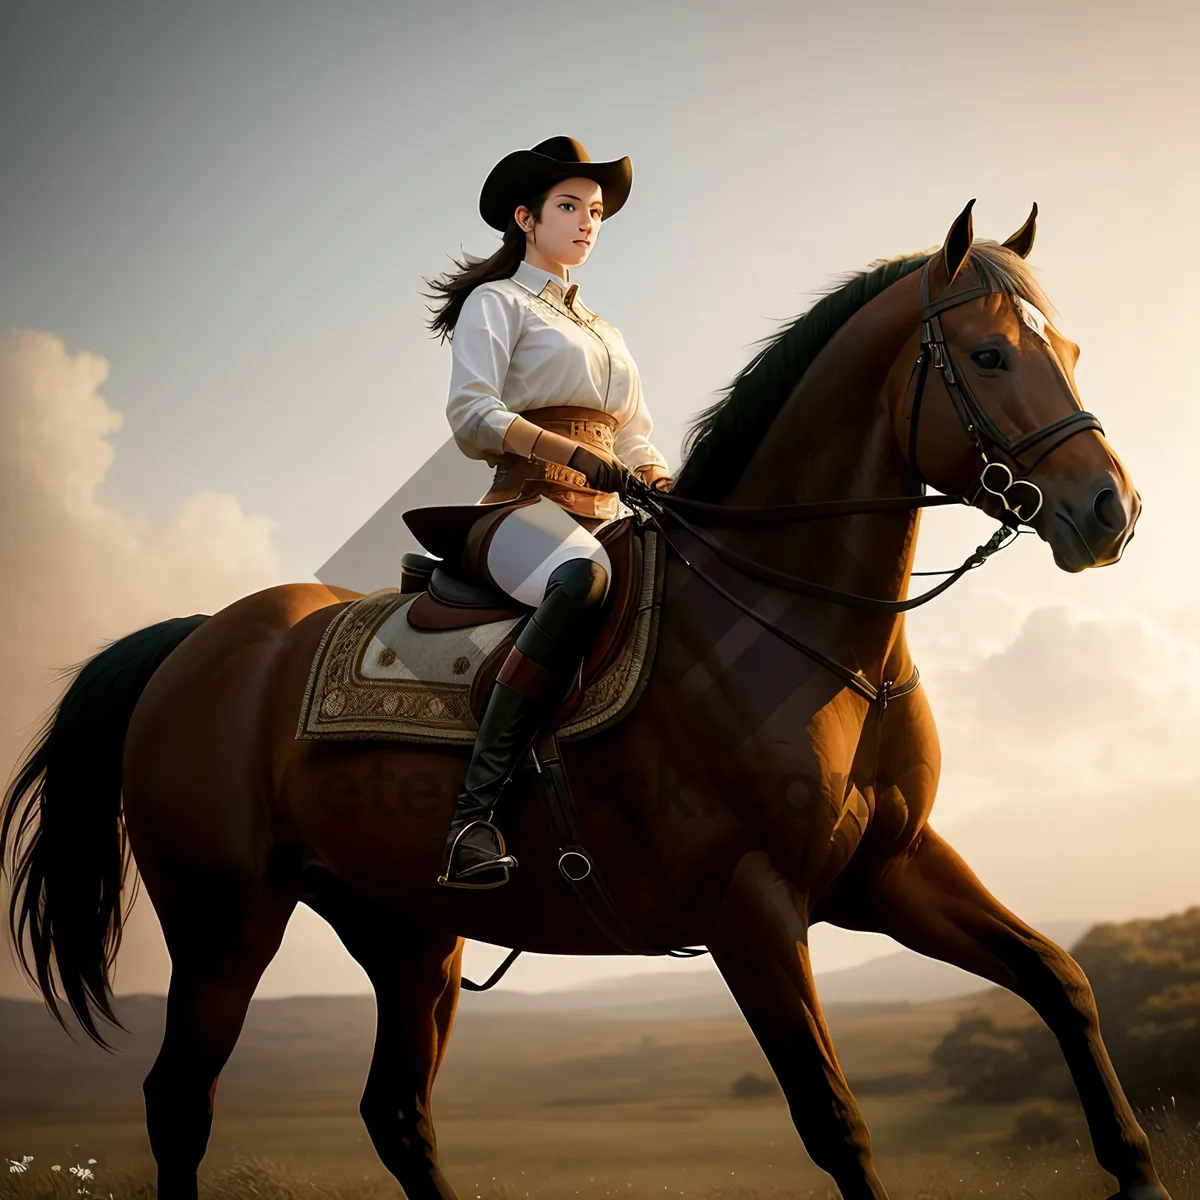 Picture of Professional equestrian riding horse with saddle and bridle